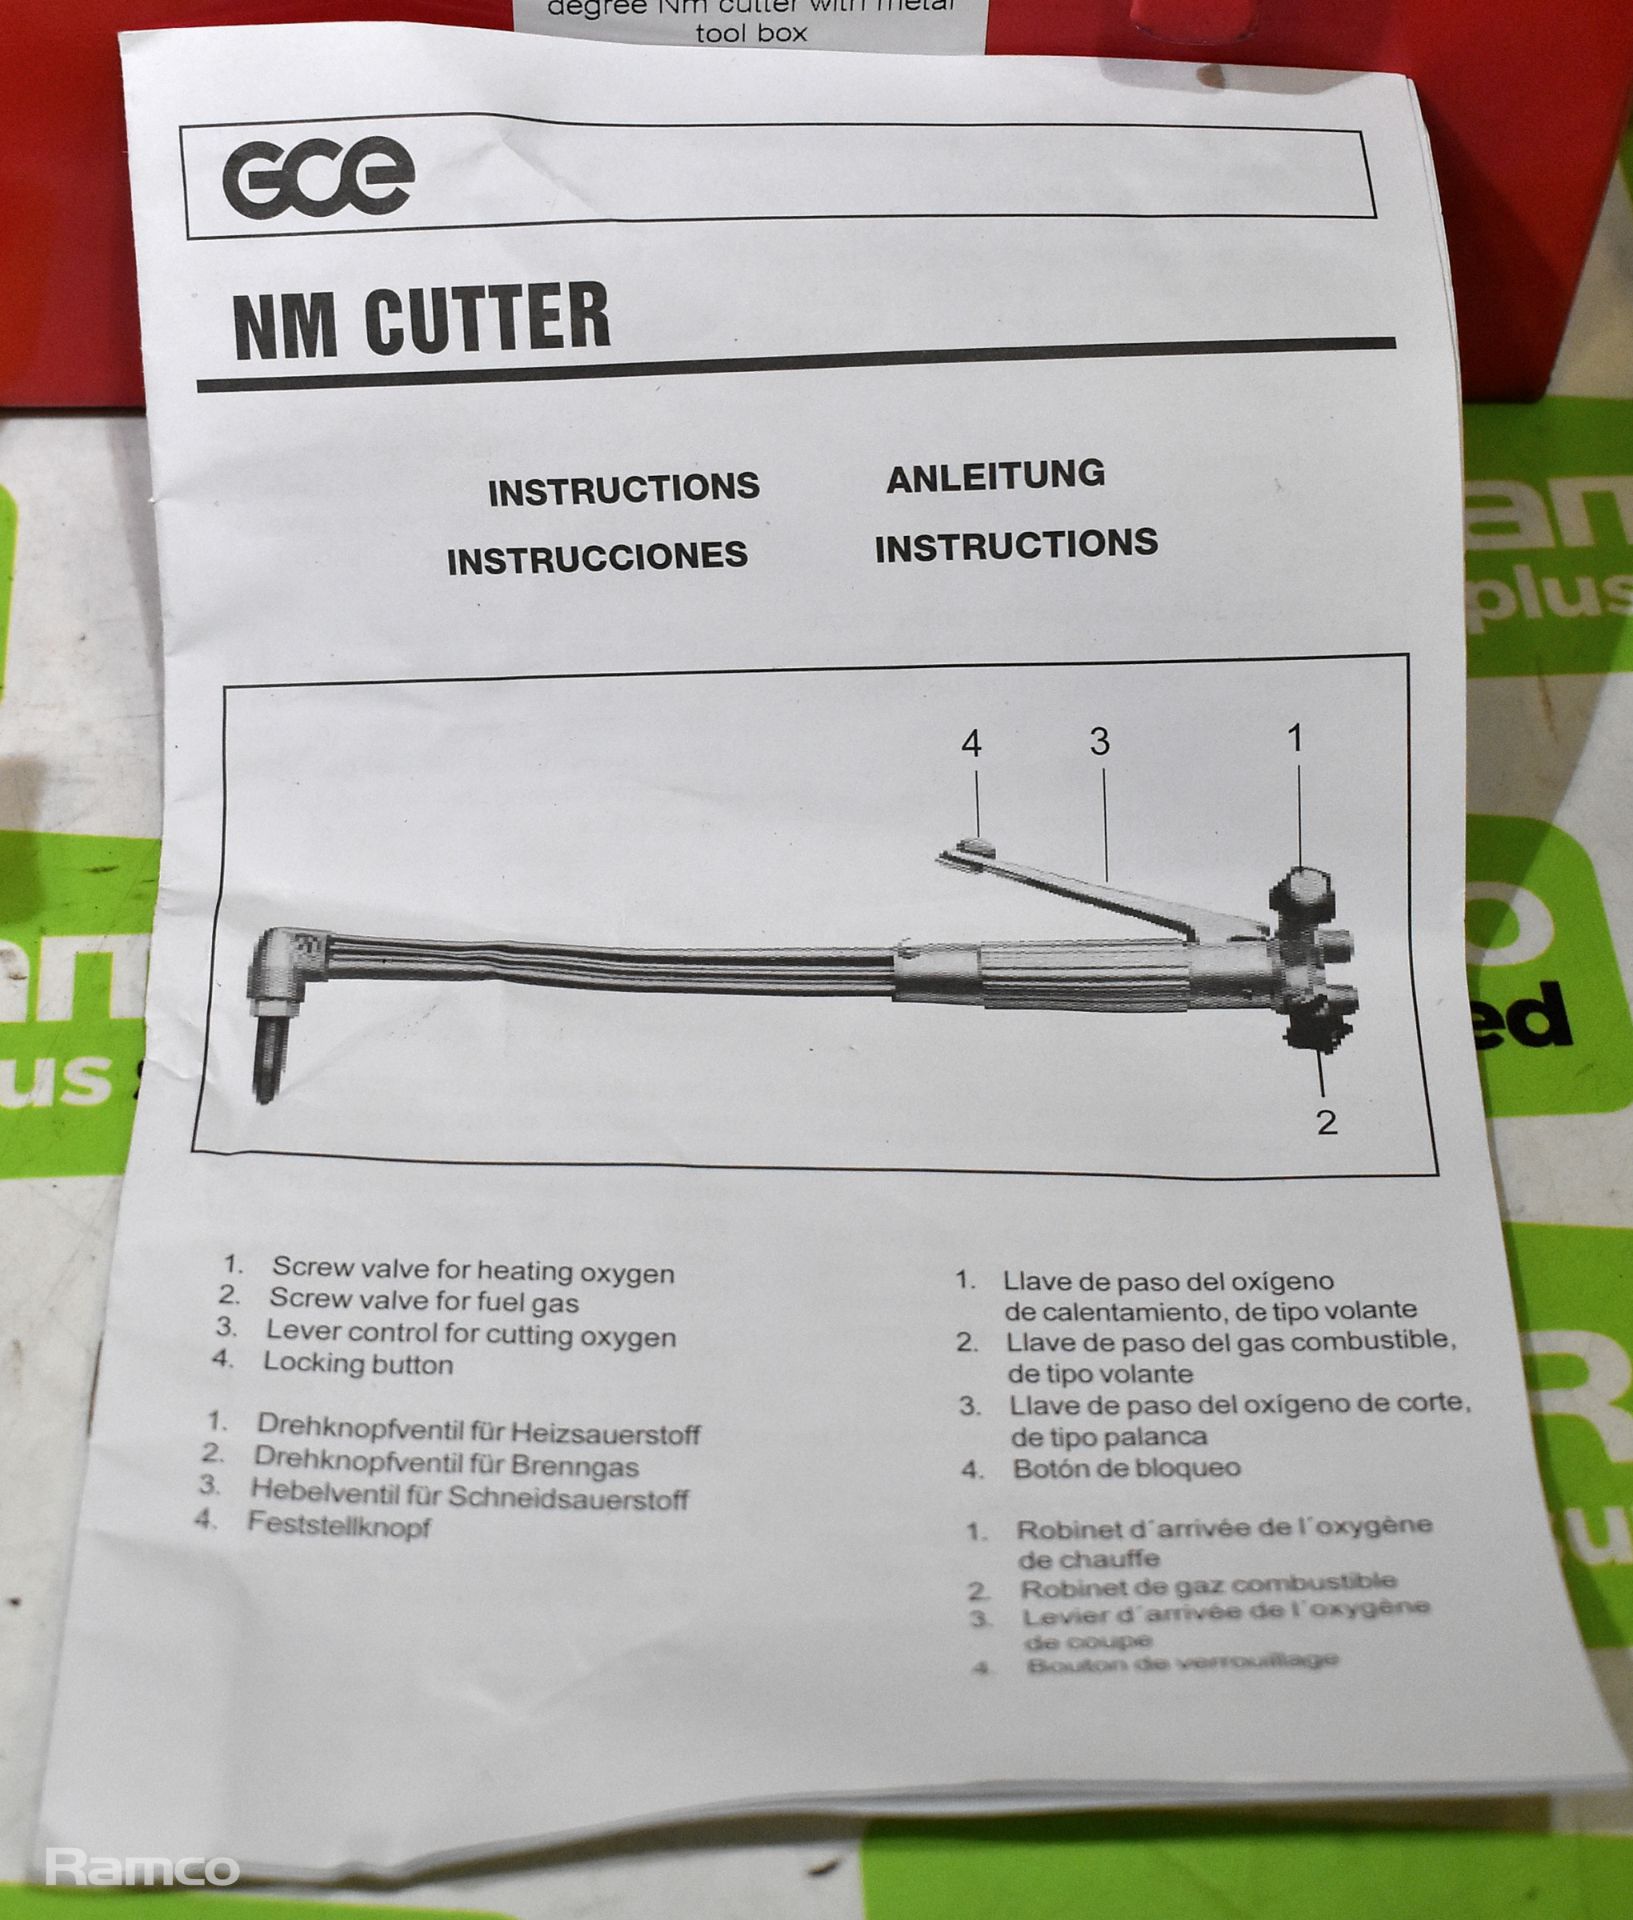 GCE Butbro gas 38 inch/90 degree Nm cutter with metal tool box - Image 4 of 5